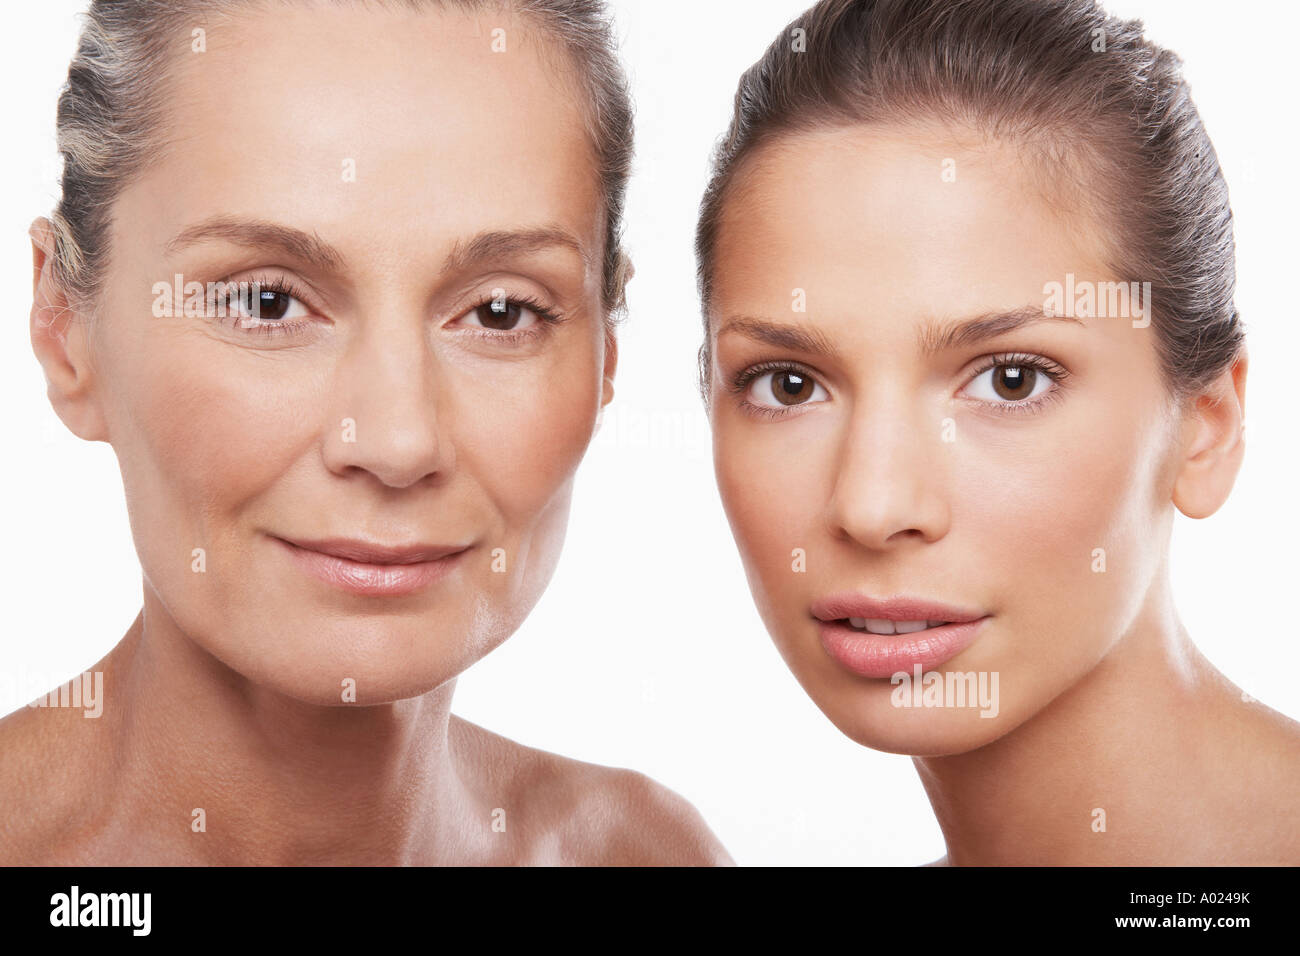 Two Beautiful Women, different ages Stock Photo